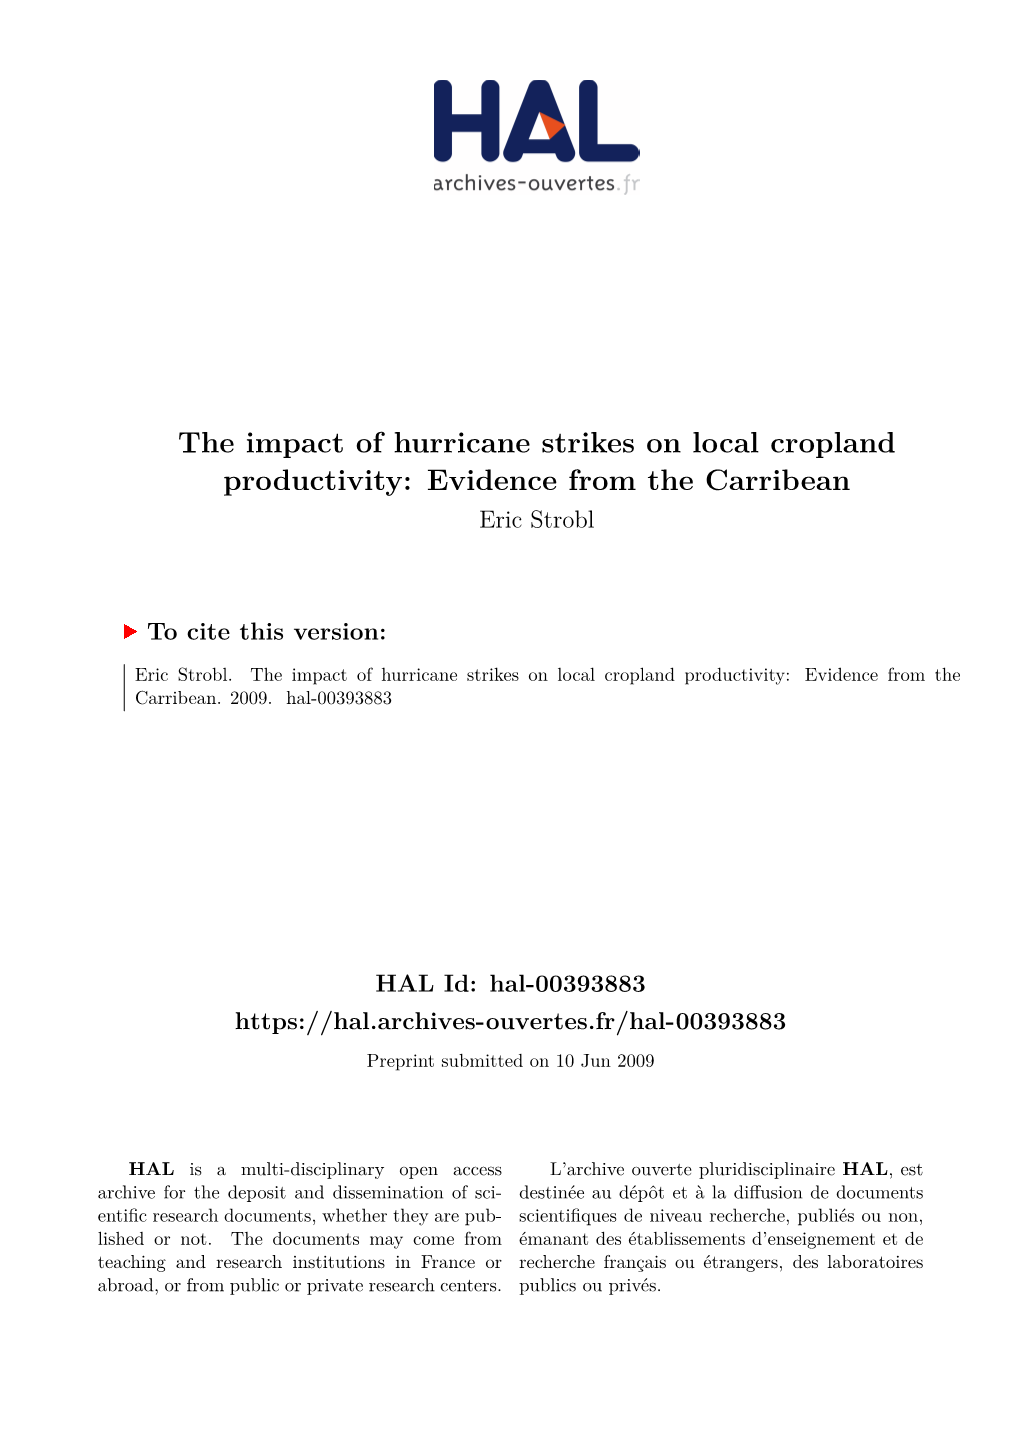 The Impact of Hurricane Strikes on Local Cropland Productivity: Evidence from the Carribean Eric Strobl